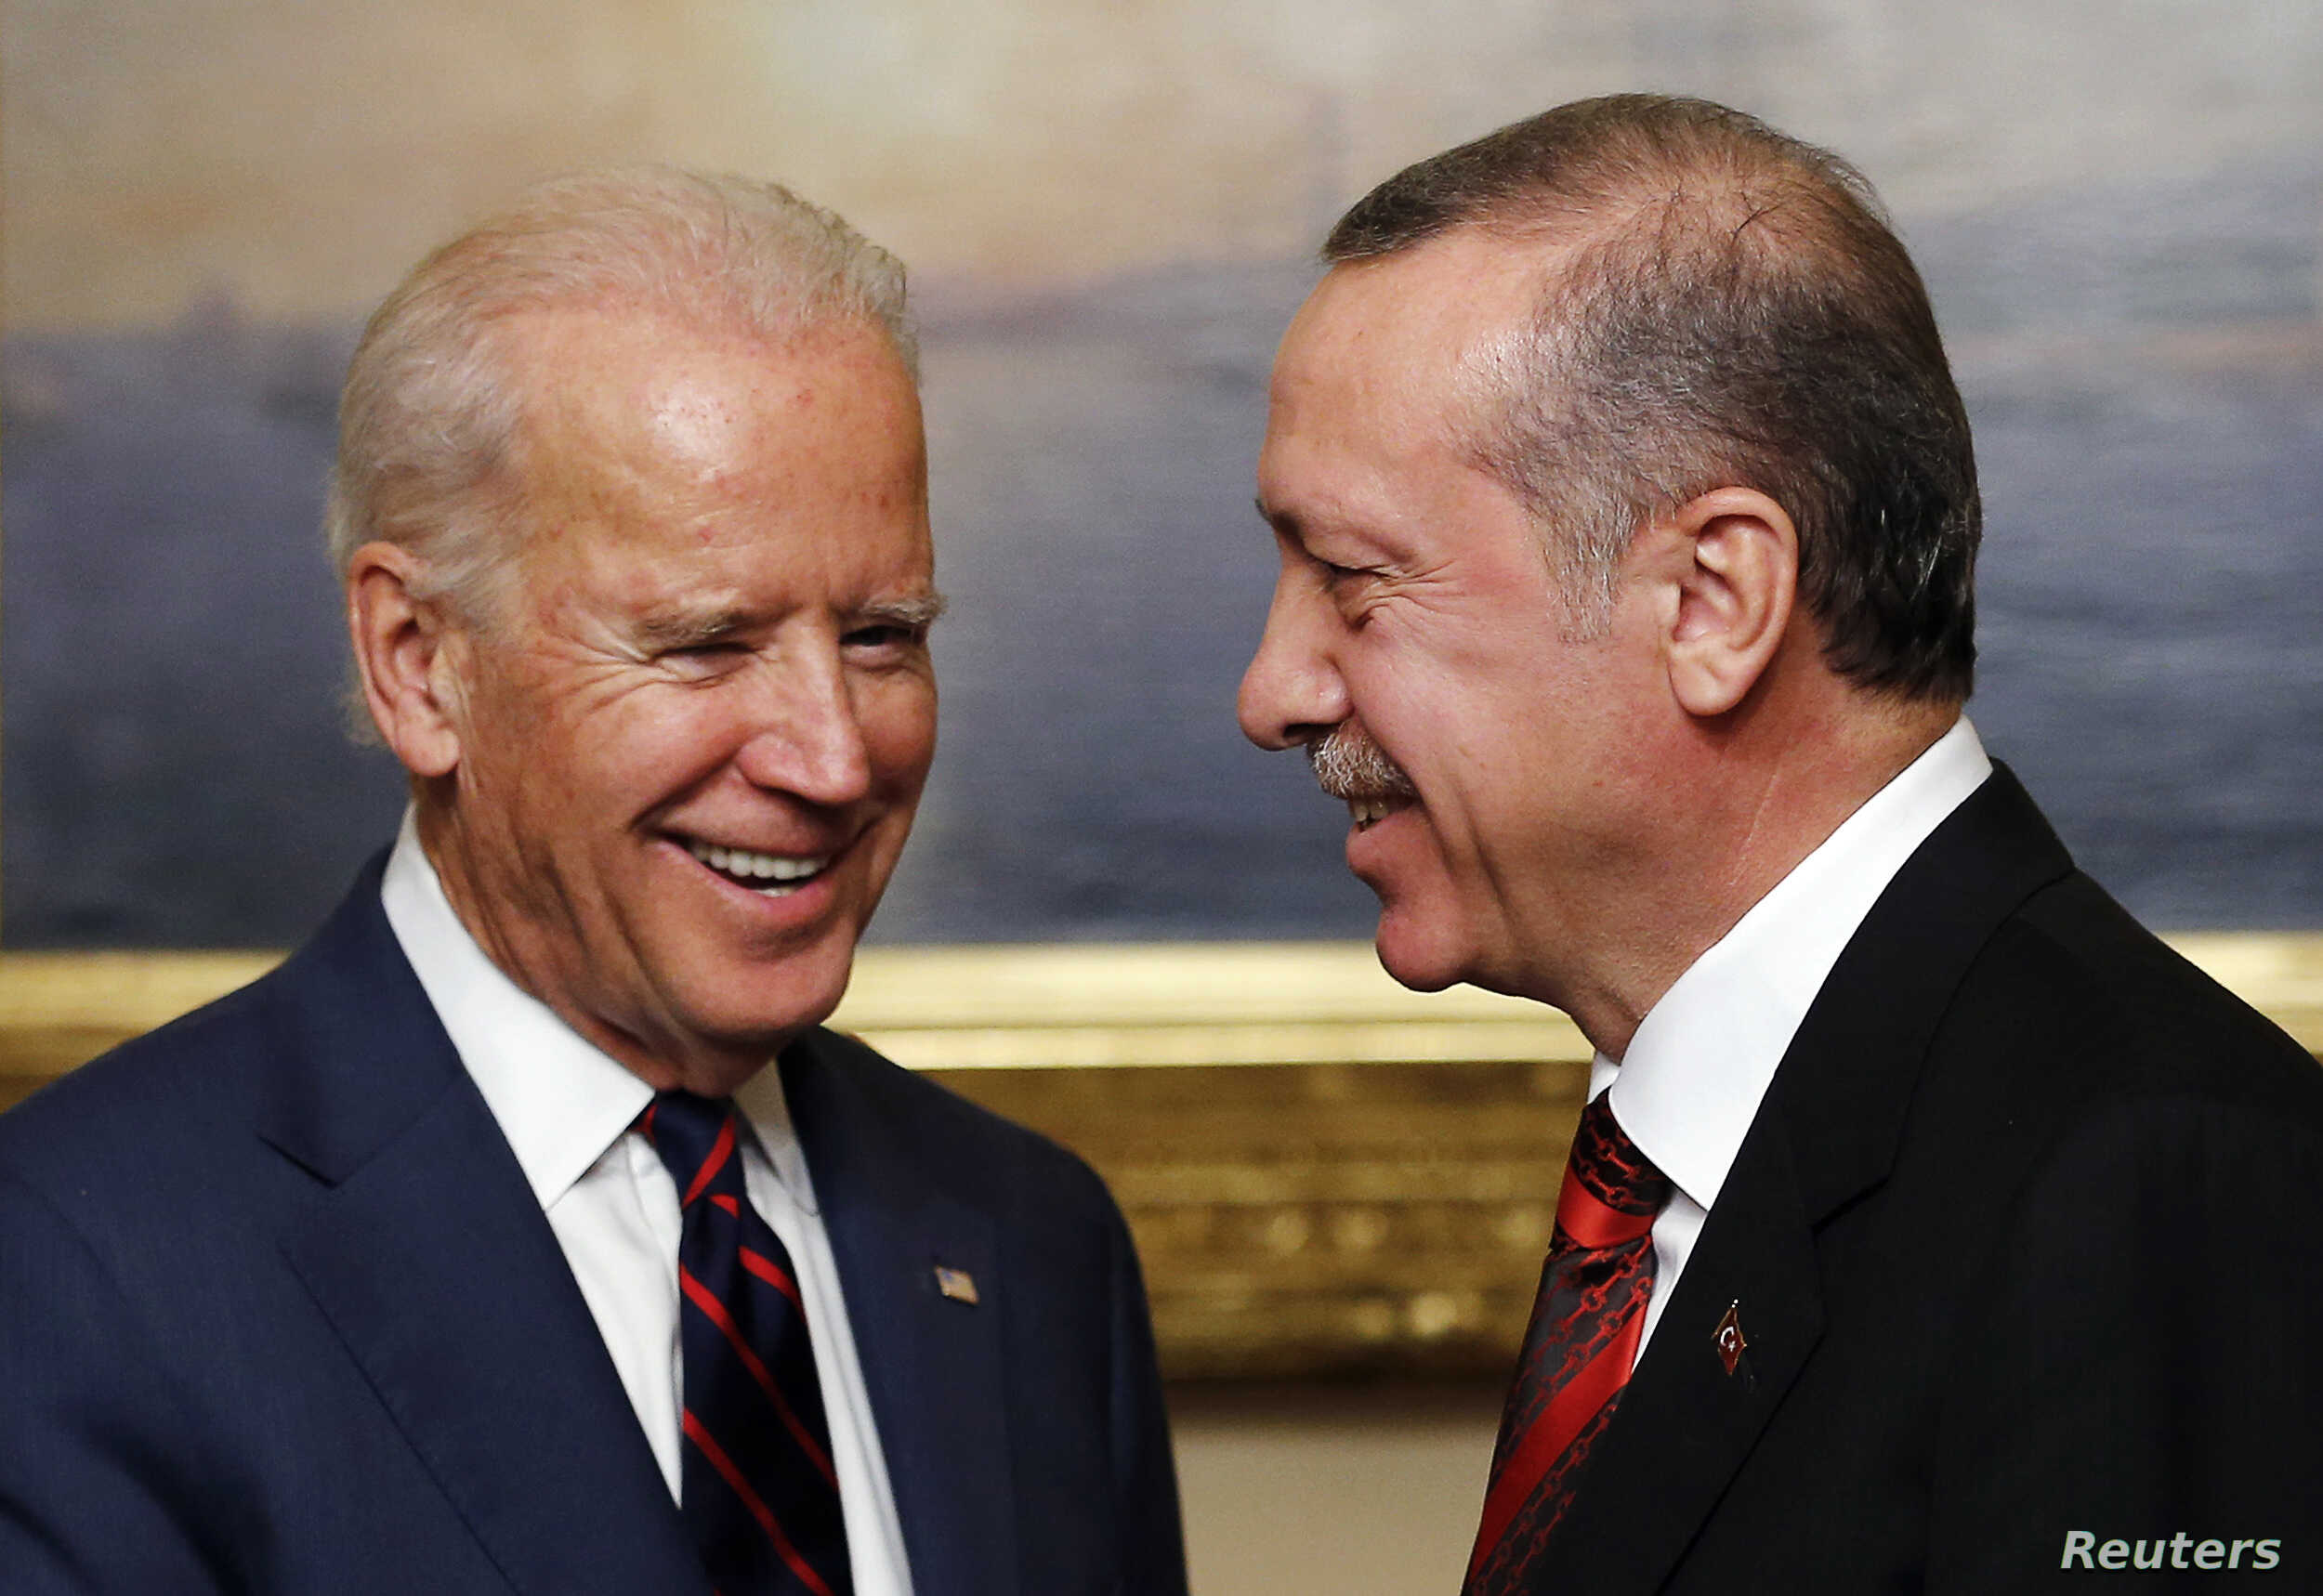 Erdogan to raise White House's recognition of Armenian Genocide during meeting with Biden - The US Armenians